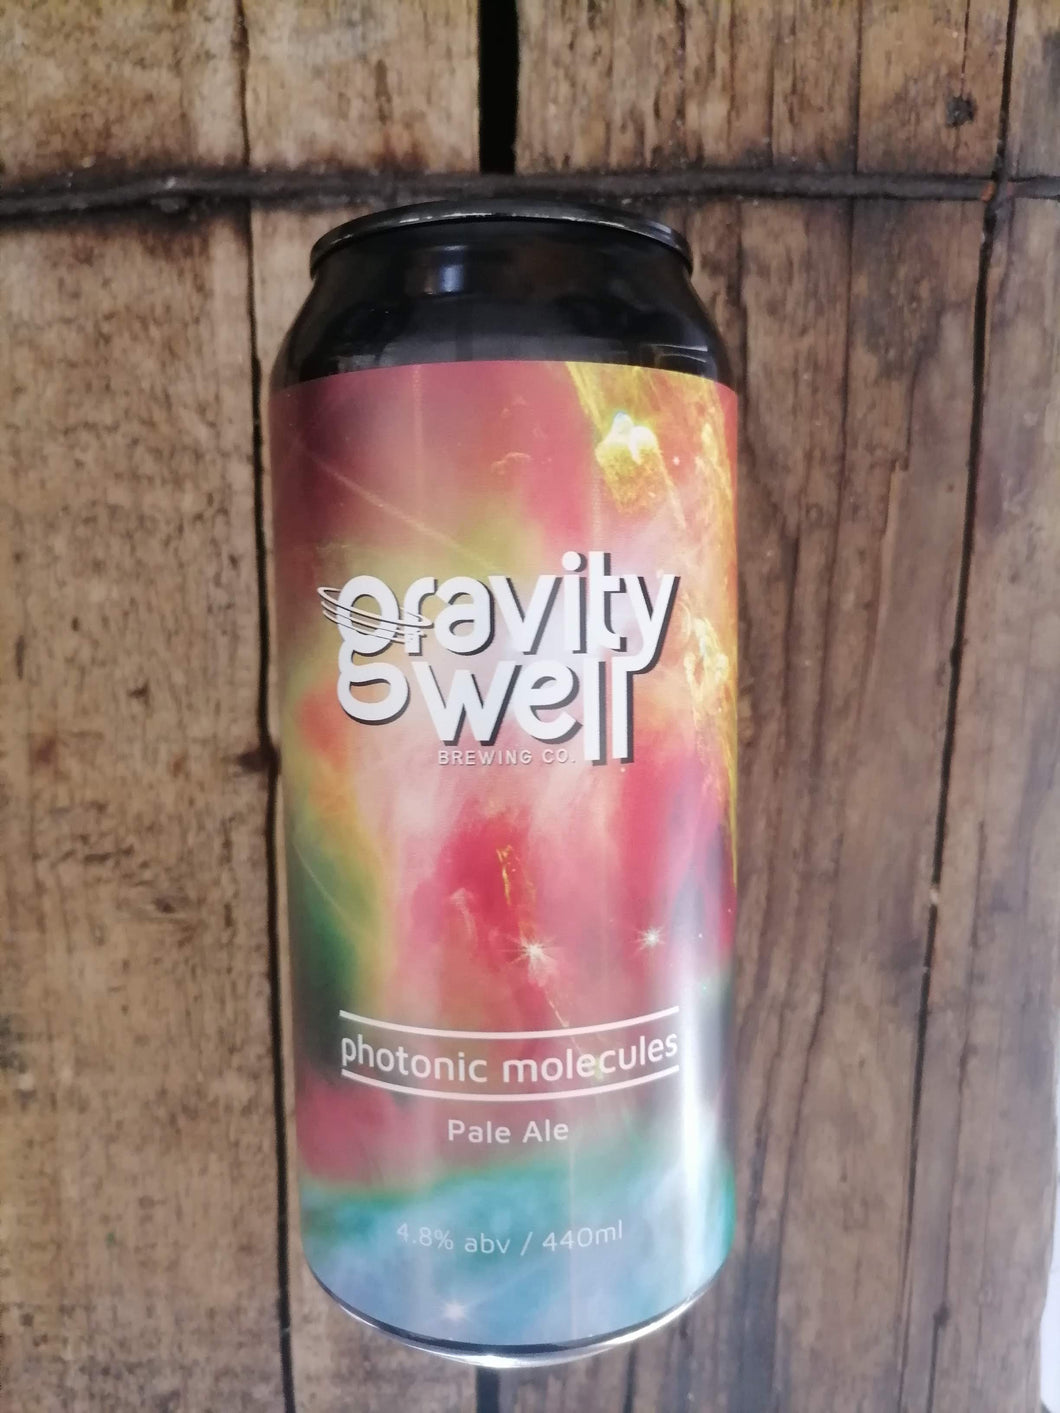 Gravity Well Photonic Molecules 4.8% (440ml can)